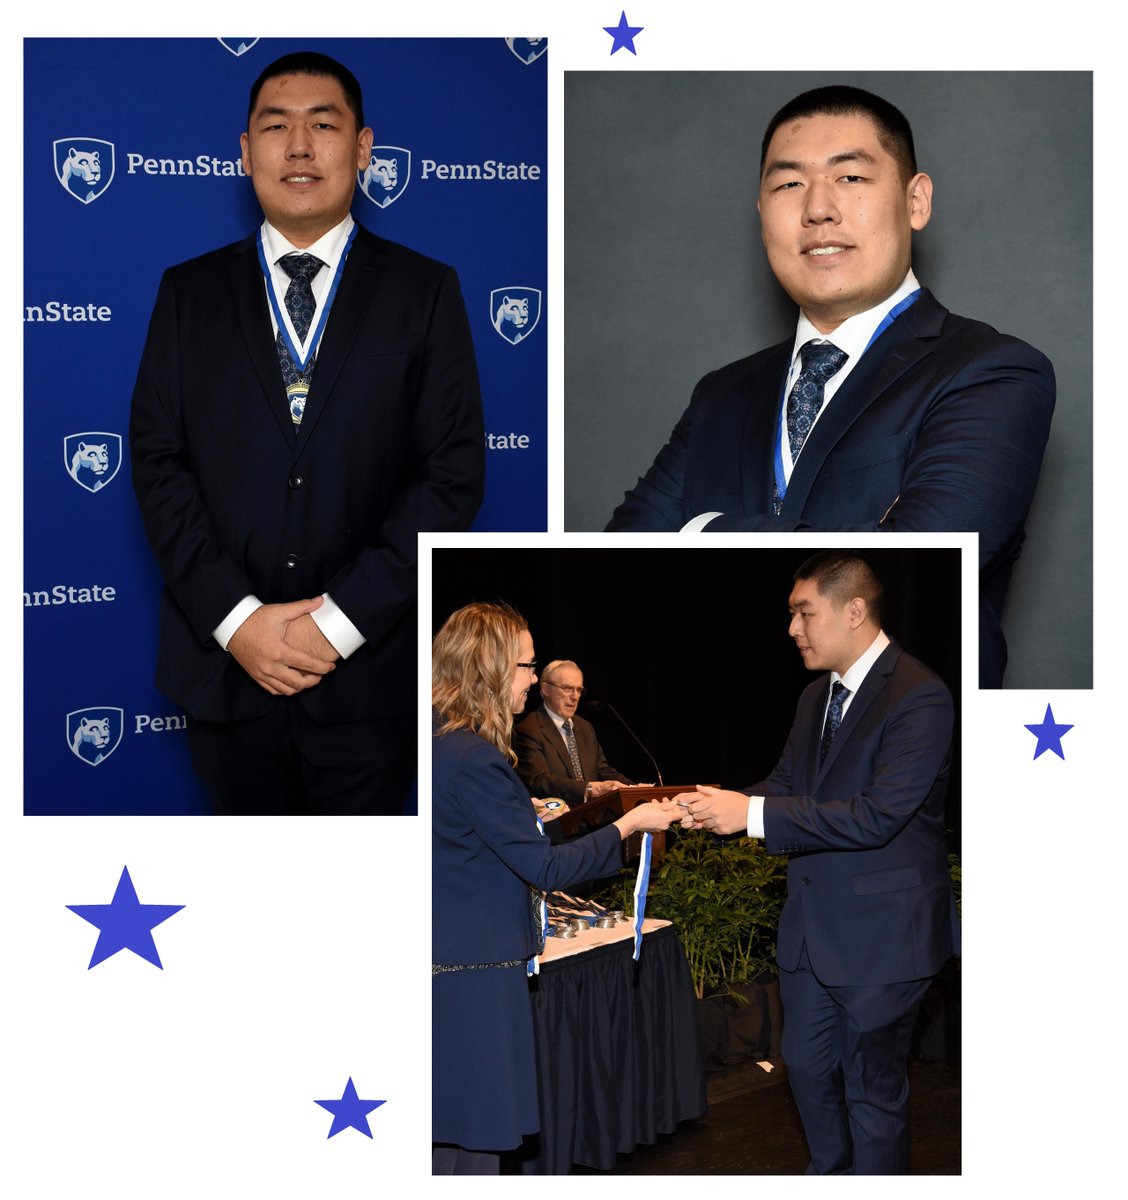 Congrats Chaojian He for receiving the Evan Pugh Scholar award which recognizes juniors in the 0.5th percentile in the university. Chaojian He has worked as a research assistant in Dr. Cynthia Huang-Pollock's Child Attention and Learning Lab. See childattention.la.psu.edu